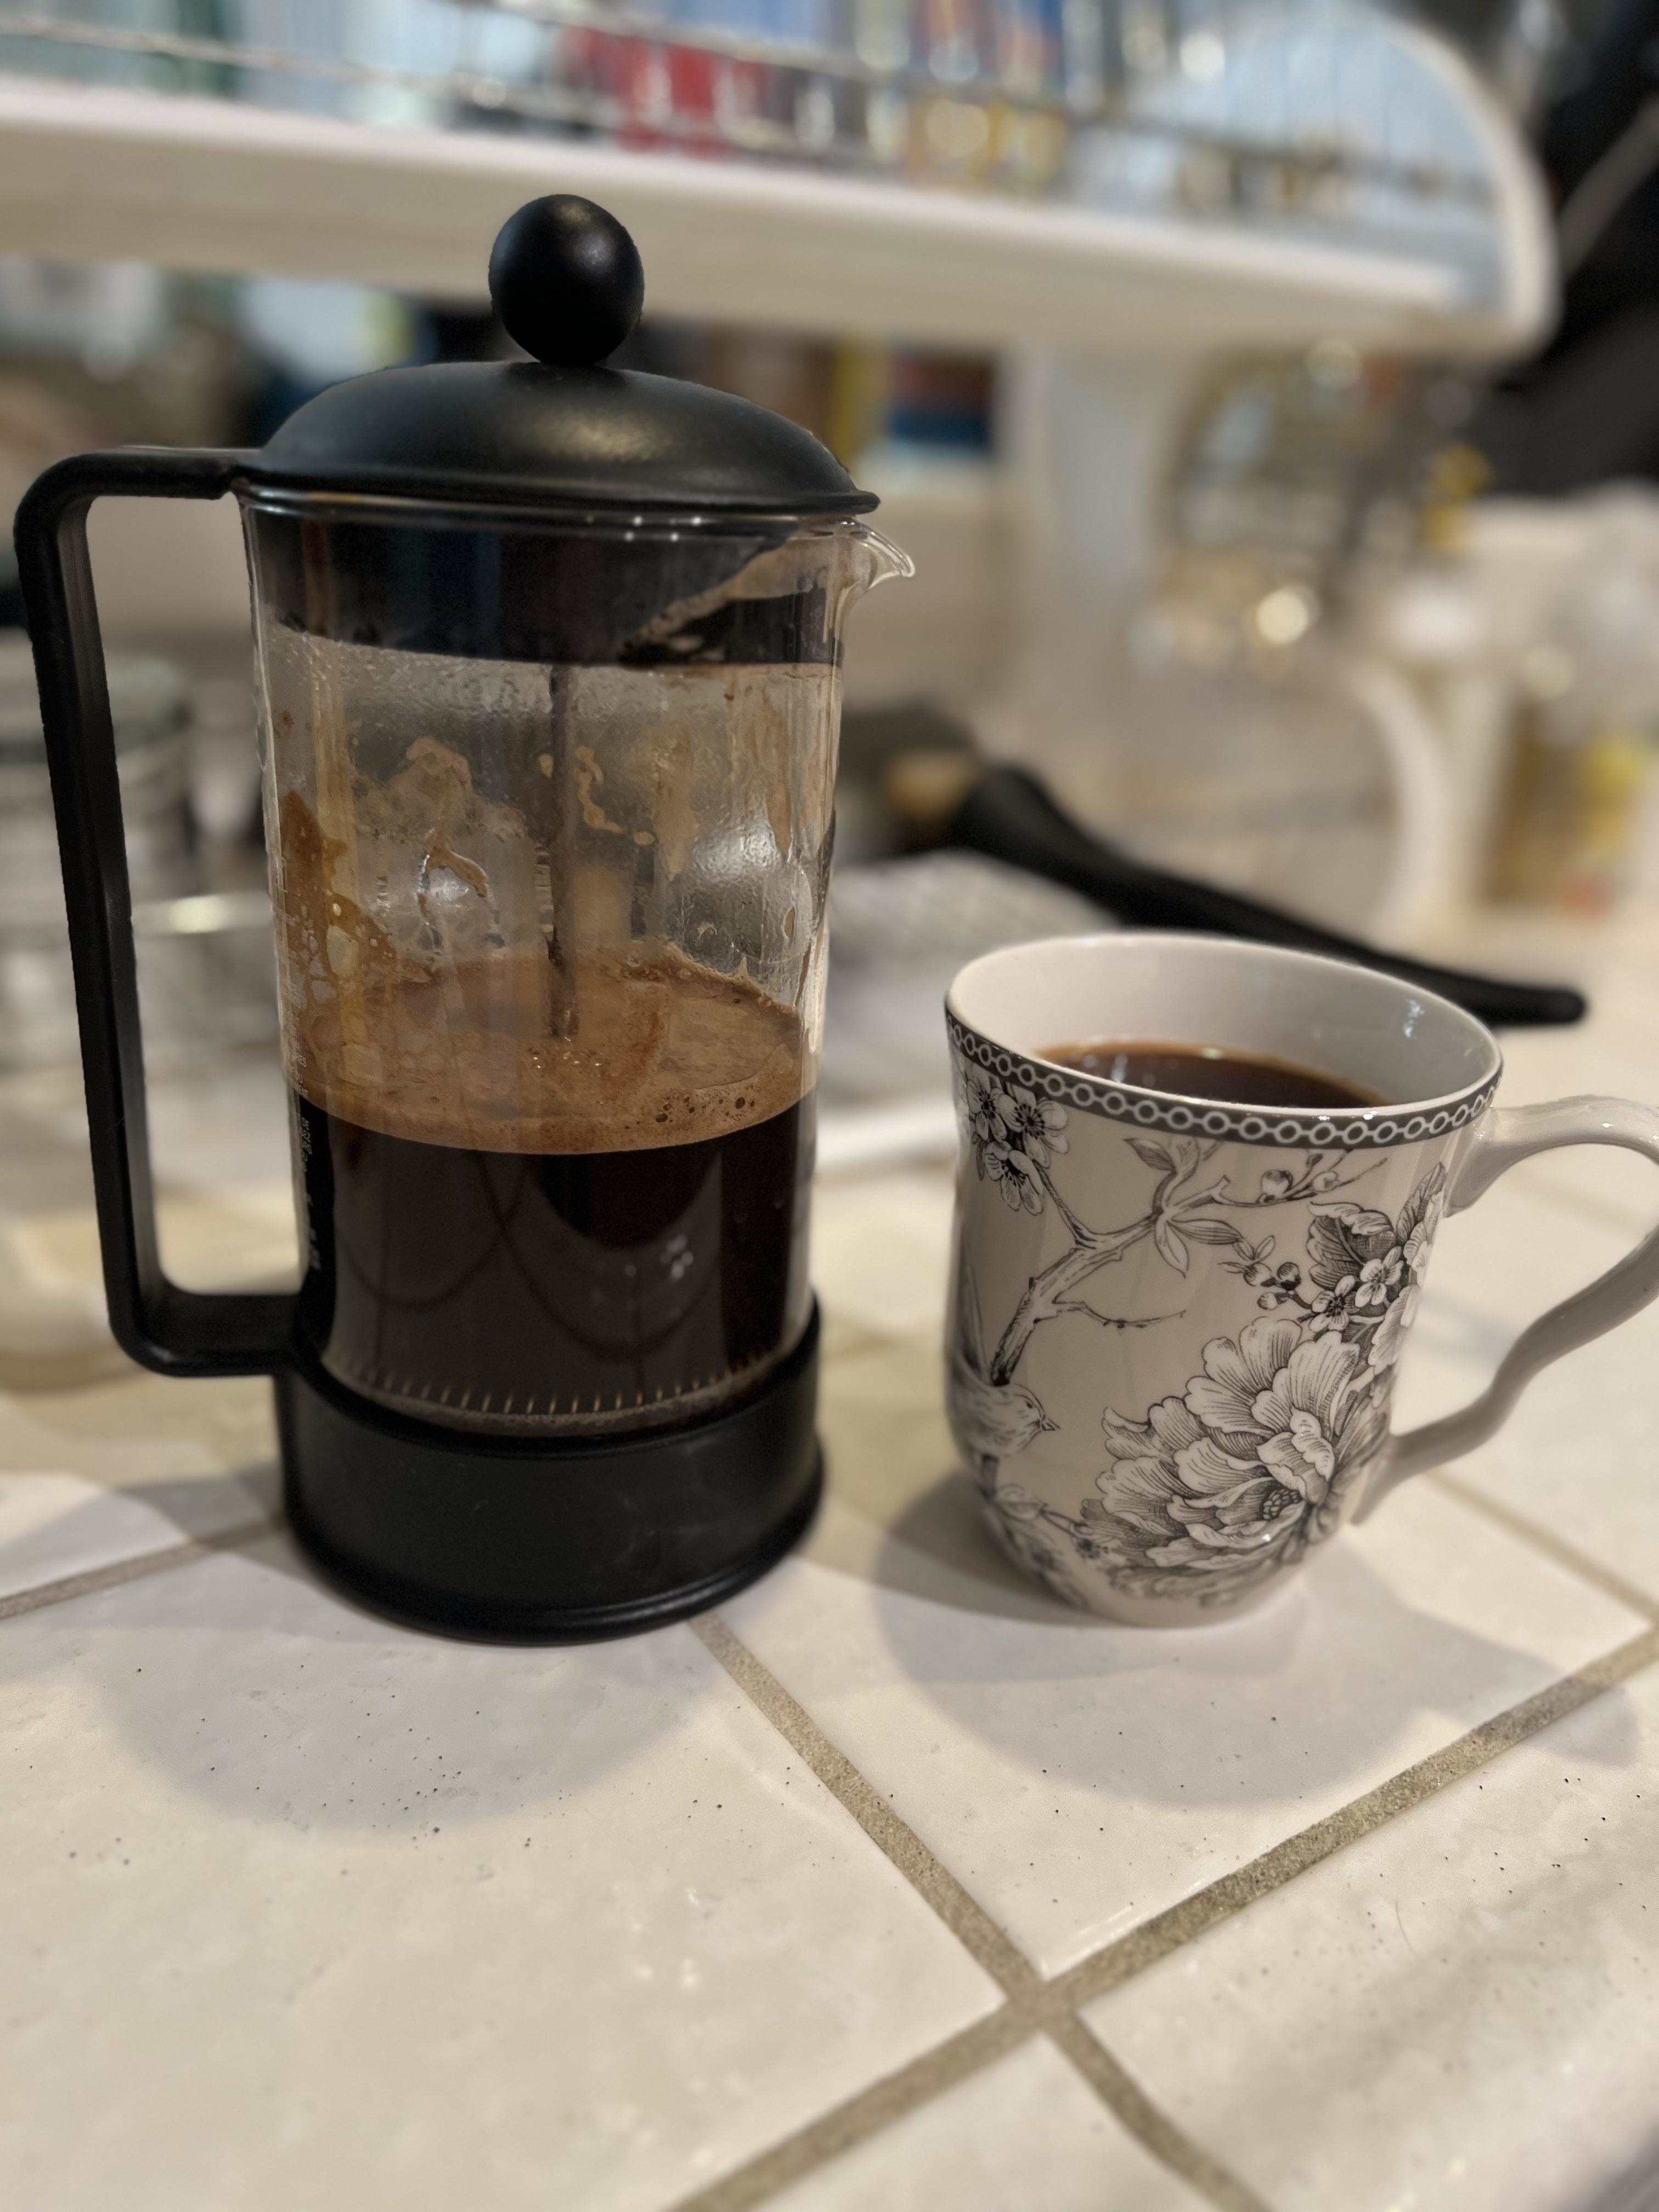 A French press with coffee next to a mug full of coffee